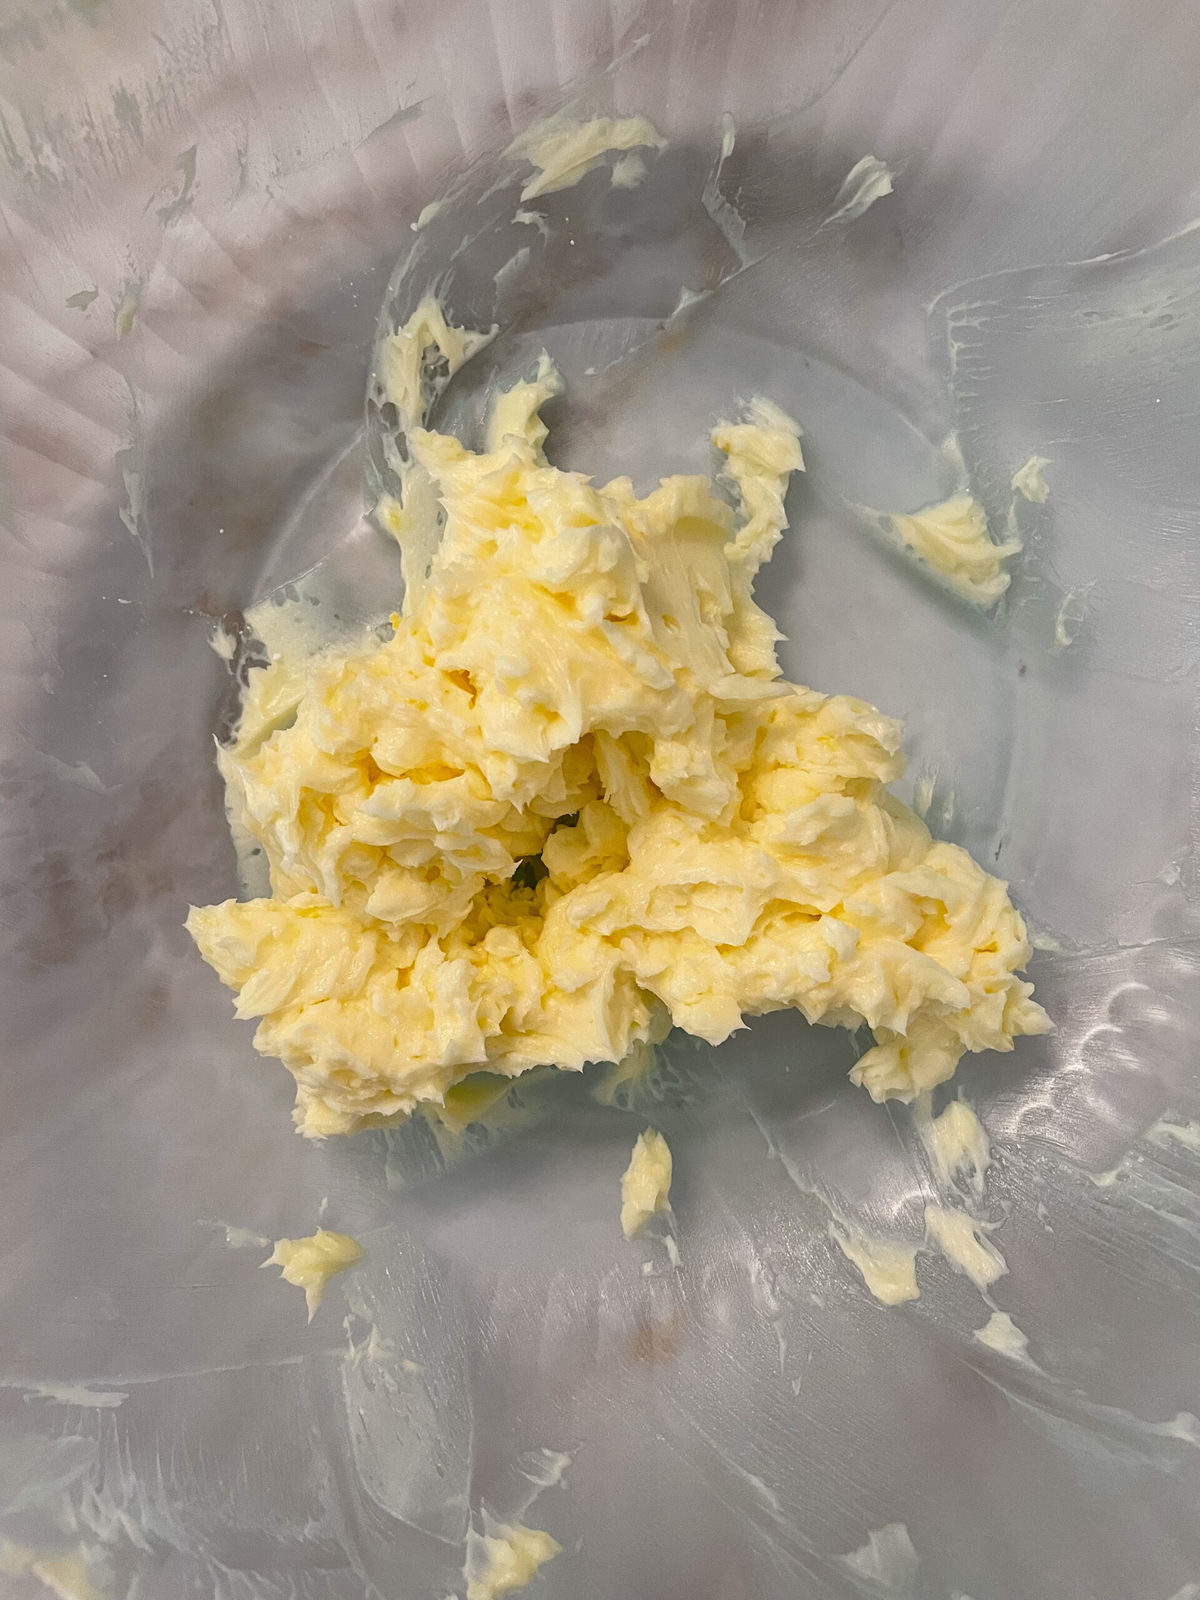 butter and sugar creamed in a bowl